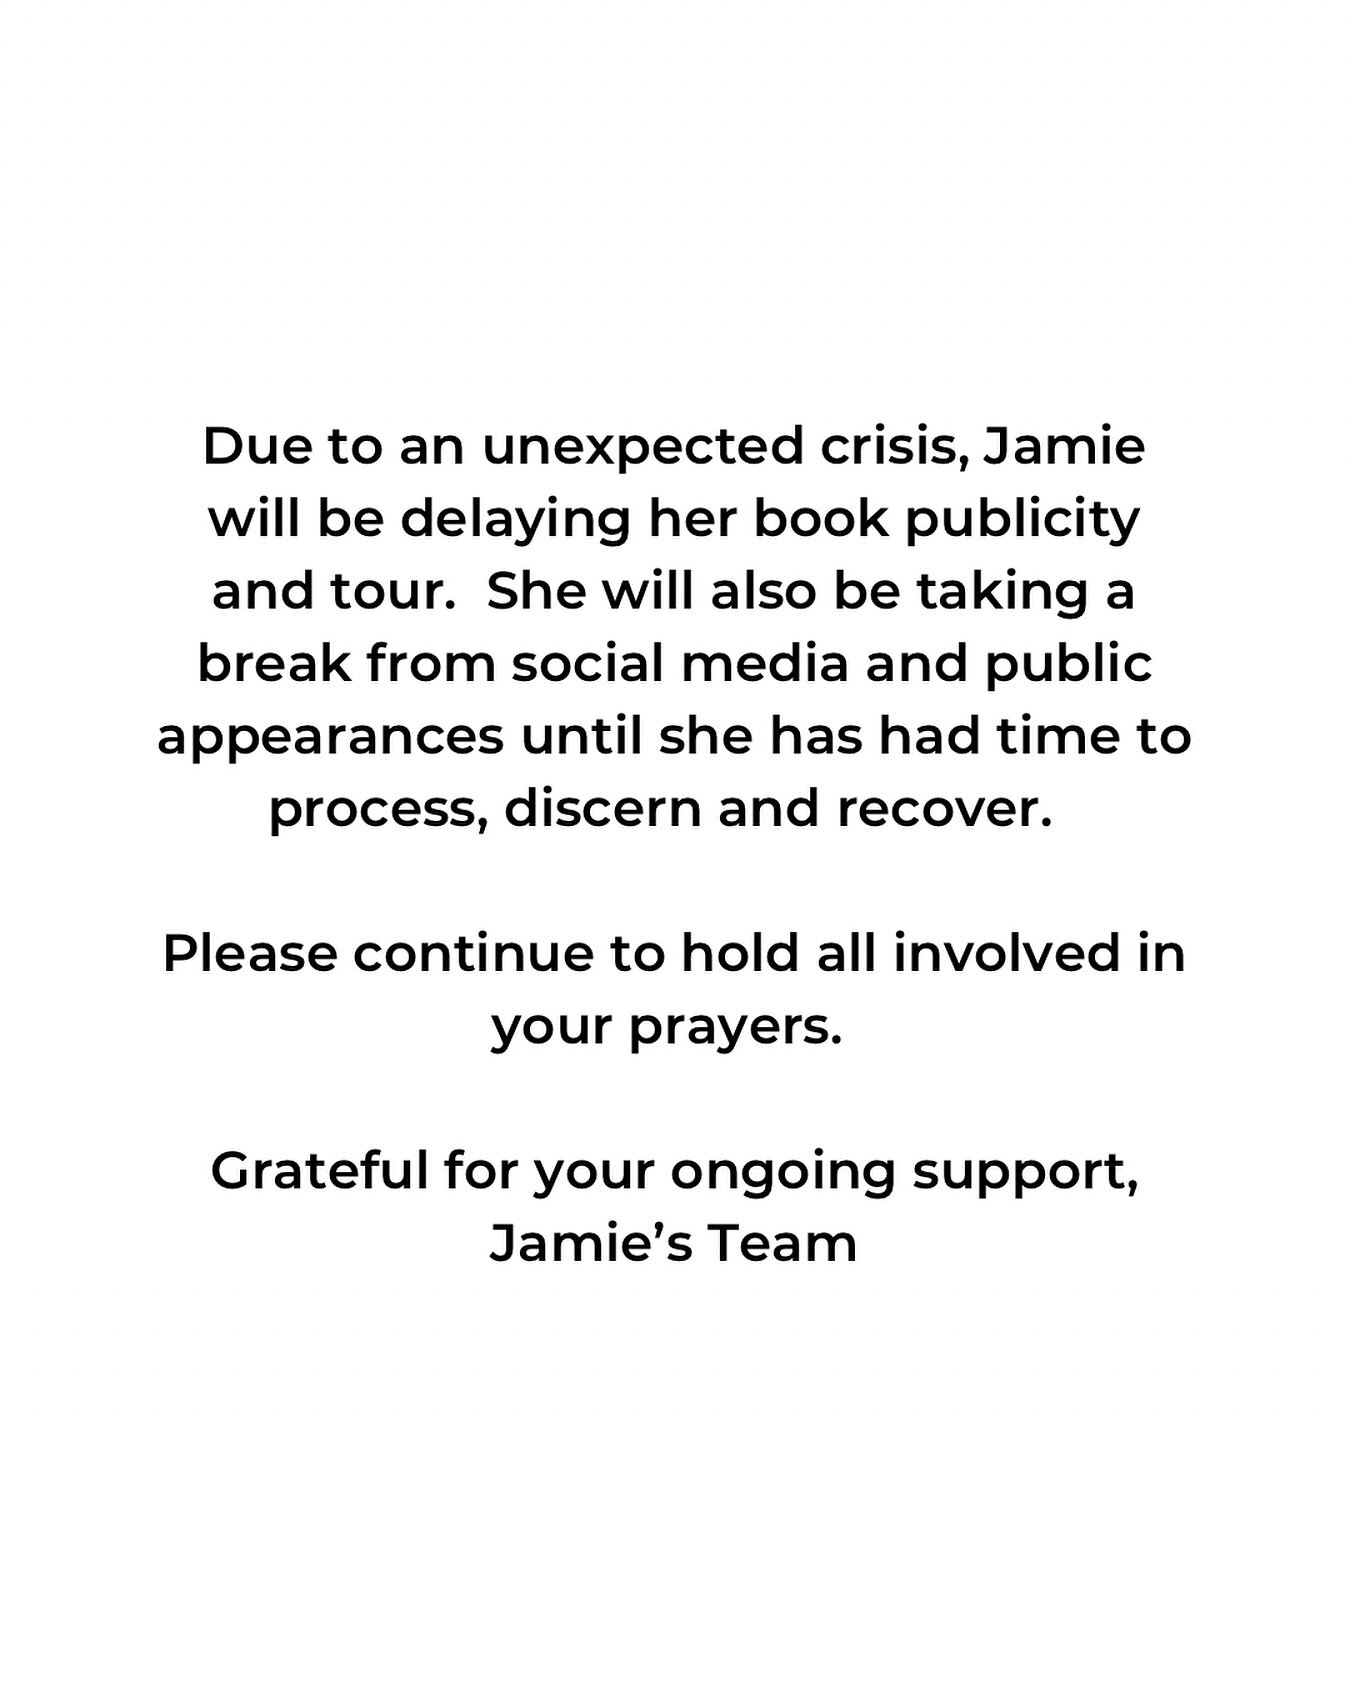 An update on the book launch from Jamie&rsquo;s team.